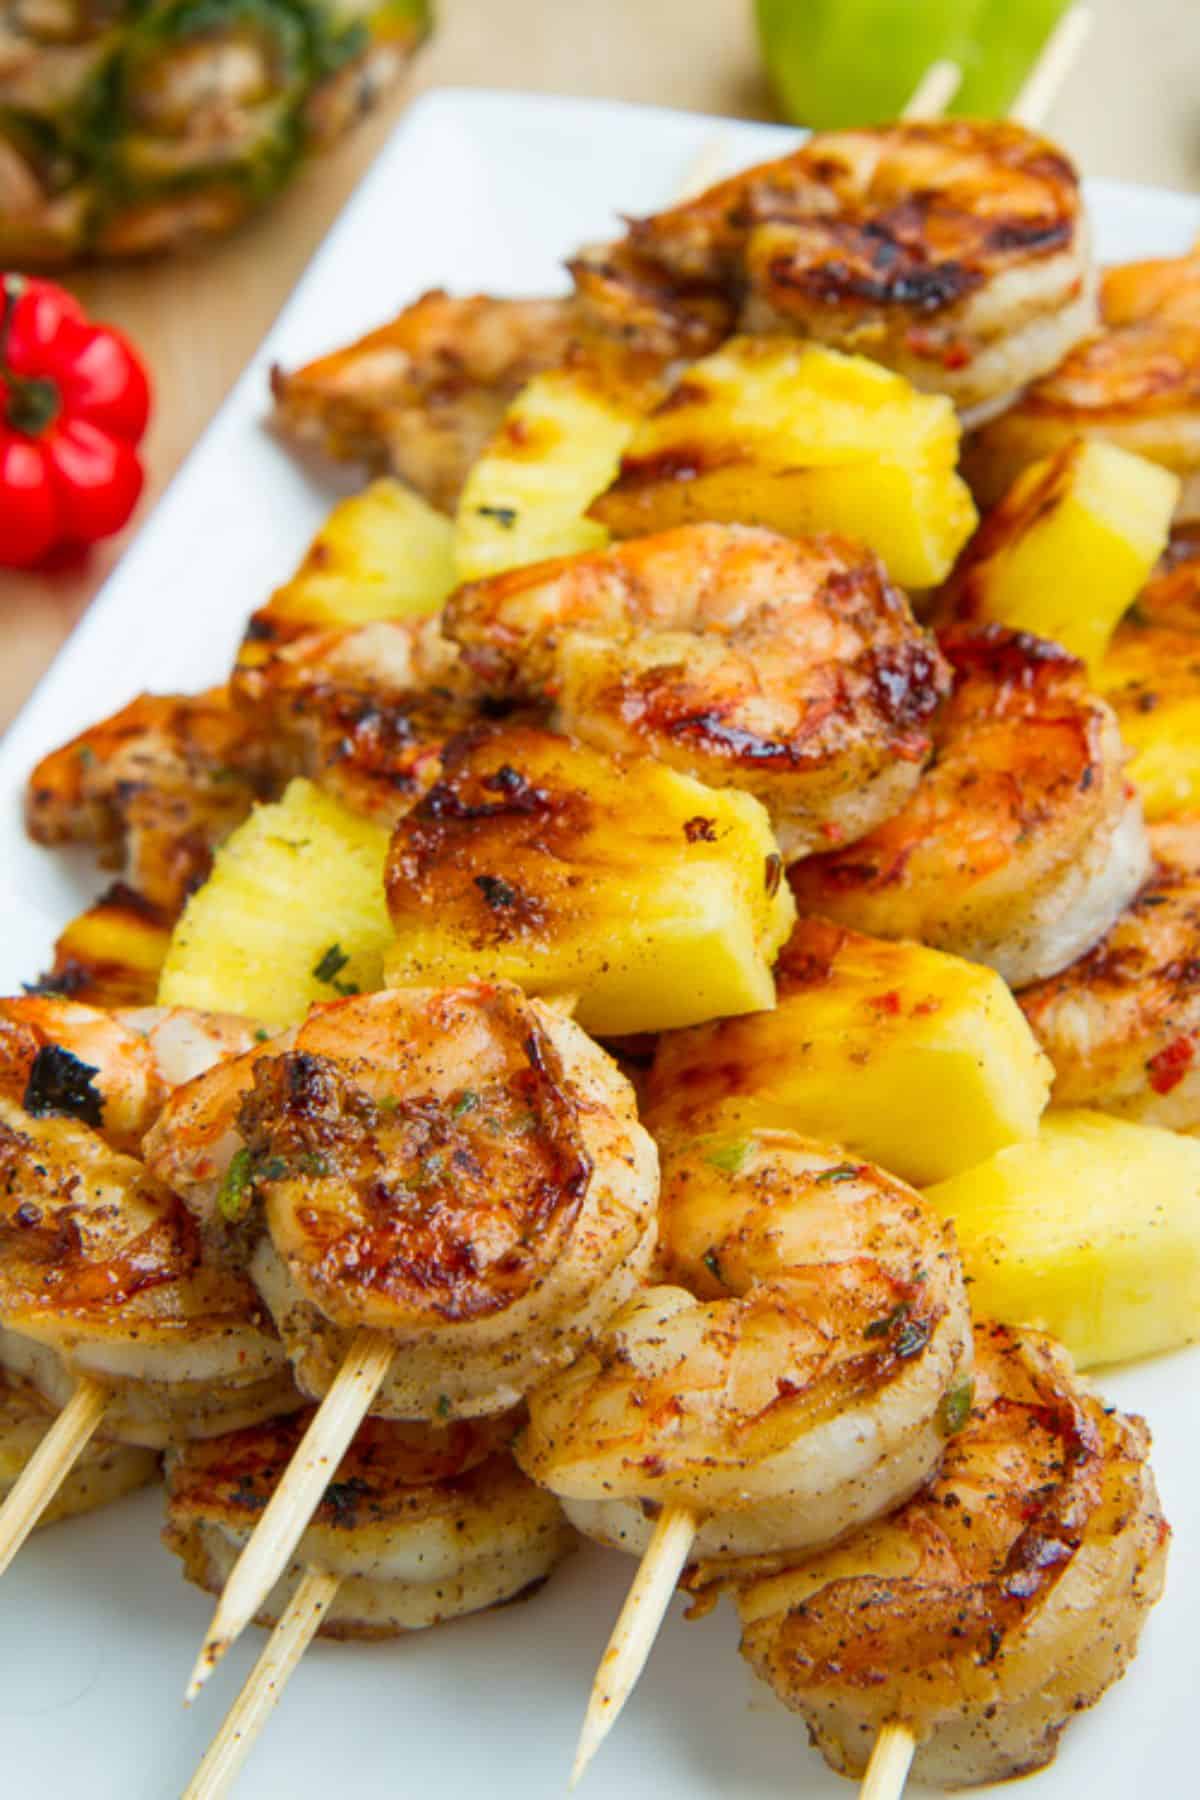 Mouth-watering grilled jerk shrimp and pineapple skewers on a white tray.